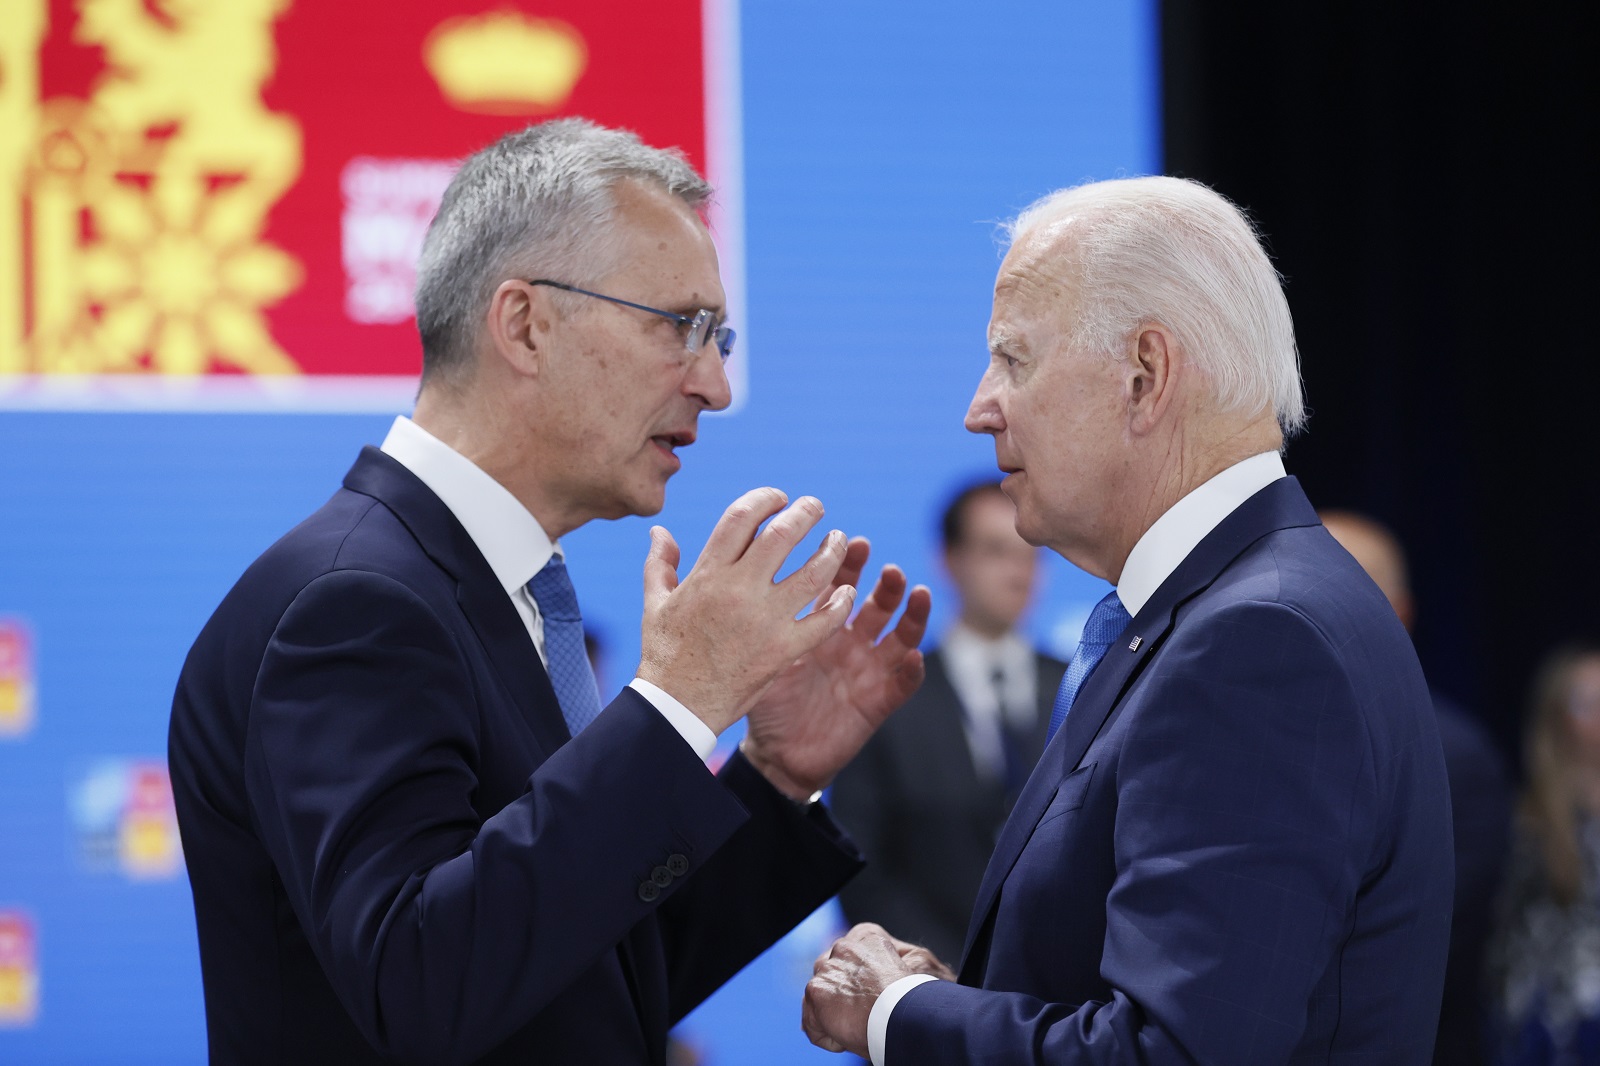 epa10041239 NATO Secretary-General, Jens Stoltenberg (L) chats with US President Joe Biden (R) after a press conference on the first day of the NATO Summit at IFEMA Convention Center, in Madrid, Spain, 29 June 2022. Heads of State and Government of NATO's member countries and key partners are gathering in Madrid from 29 to 30 June to discuss security concerns like Russia's invasion of Ukraine and other challenges. Spain is hosting 2022 NATO Summit coinciding with the 40th anniversary of its accession to NATO.  EPA/Lavandeira Jr